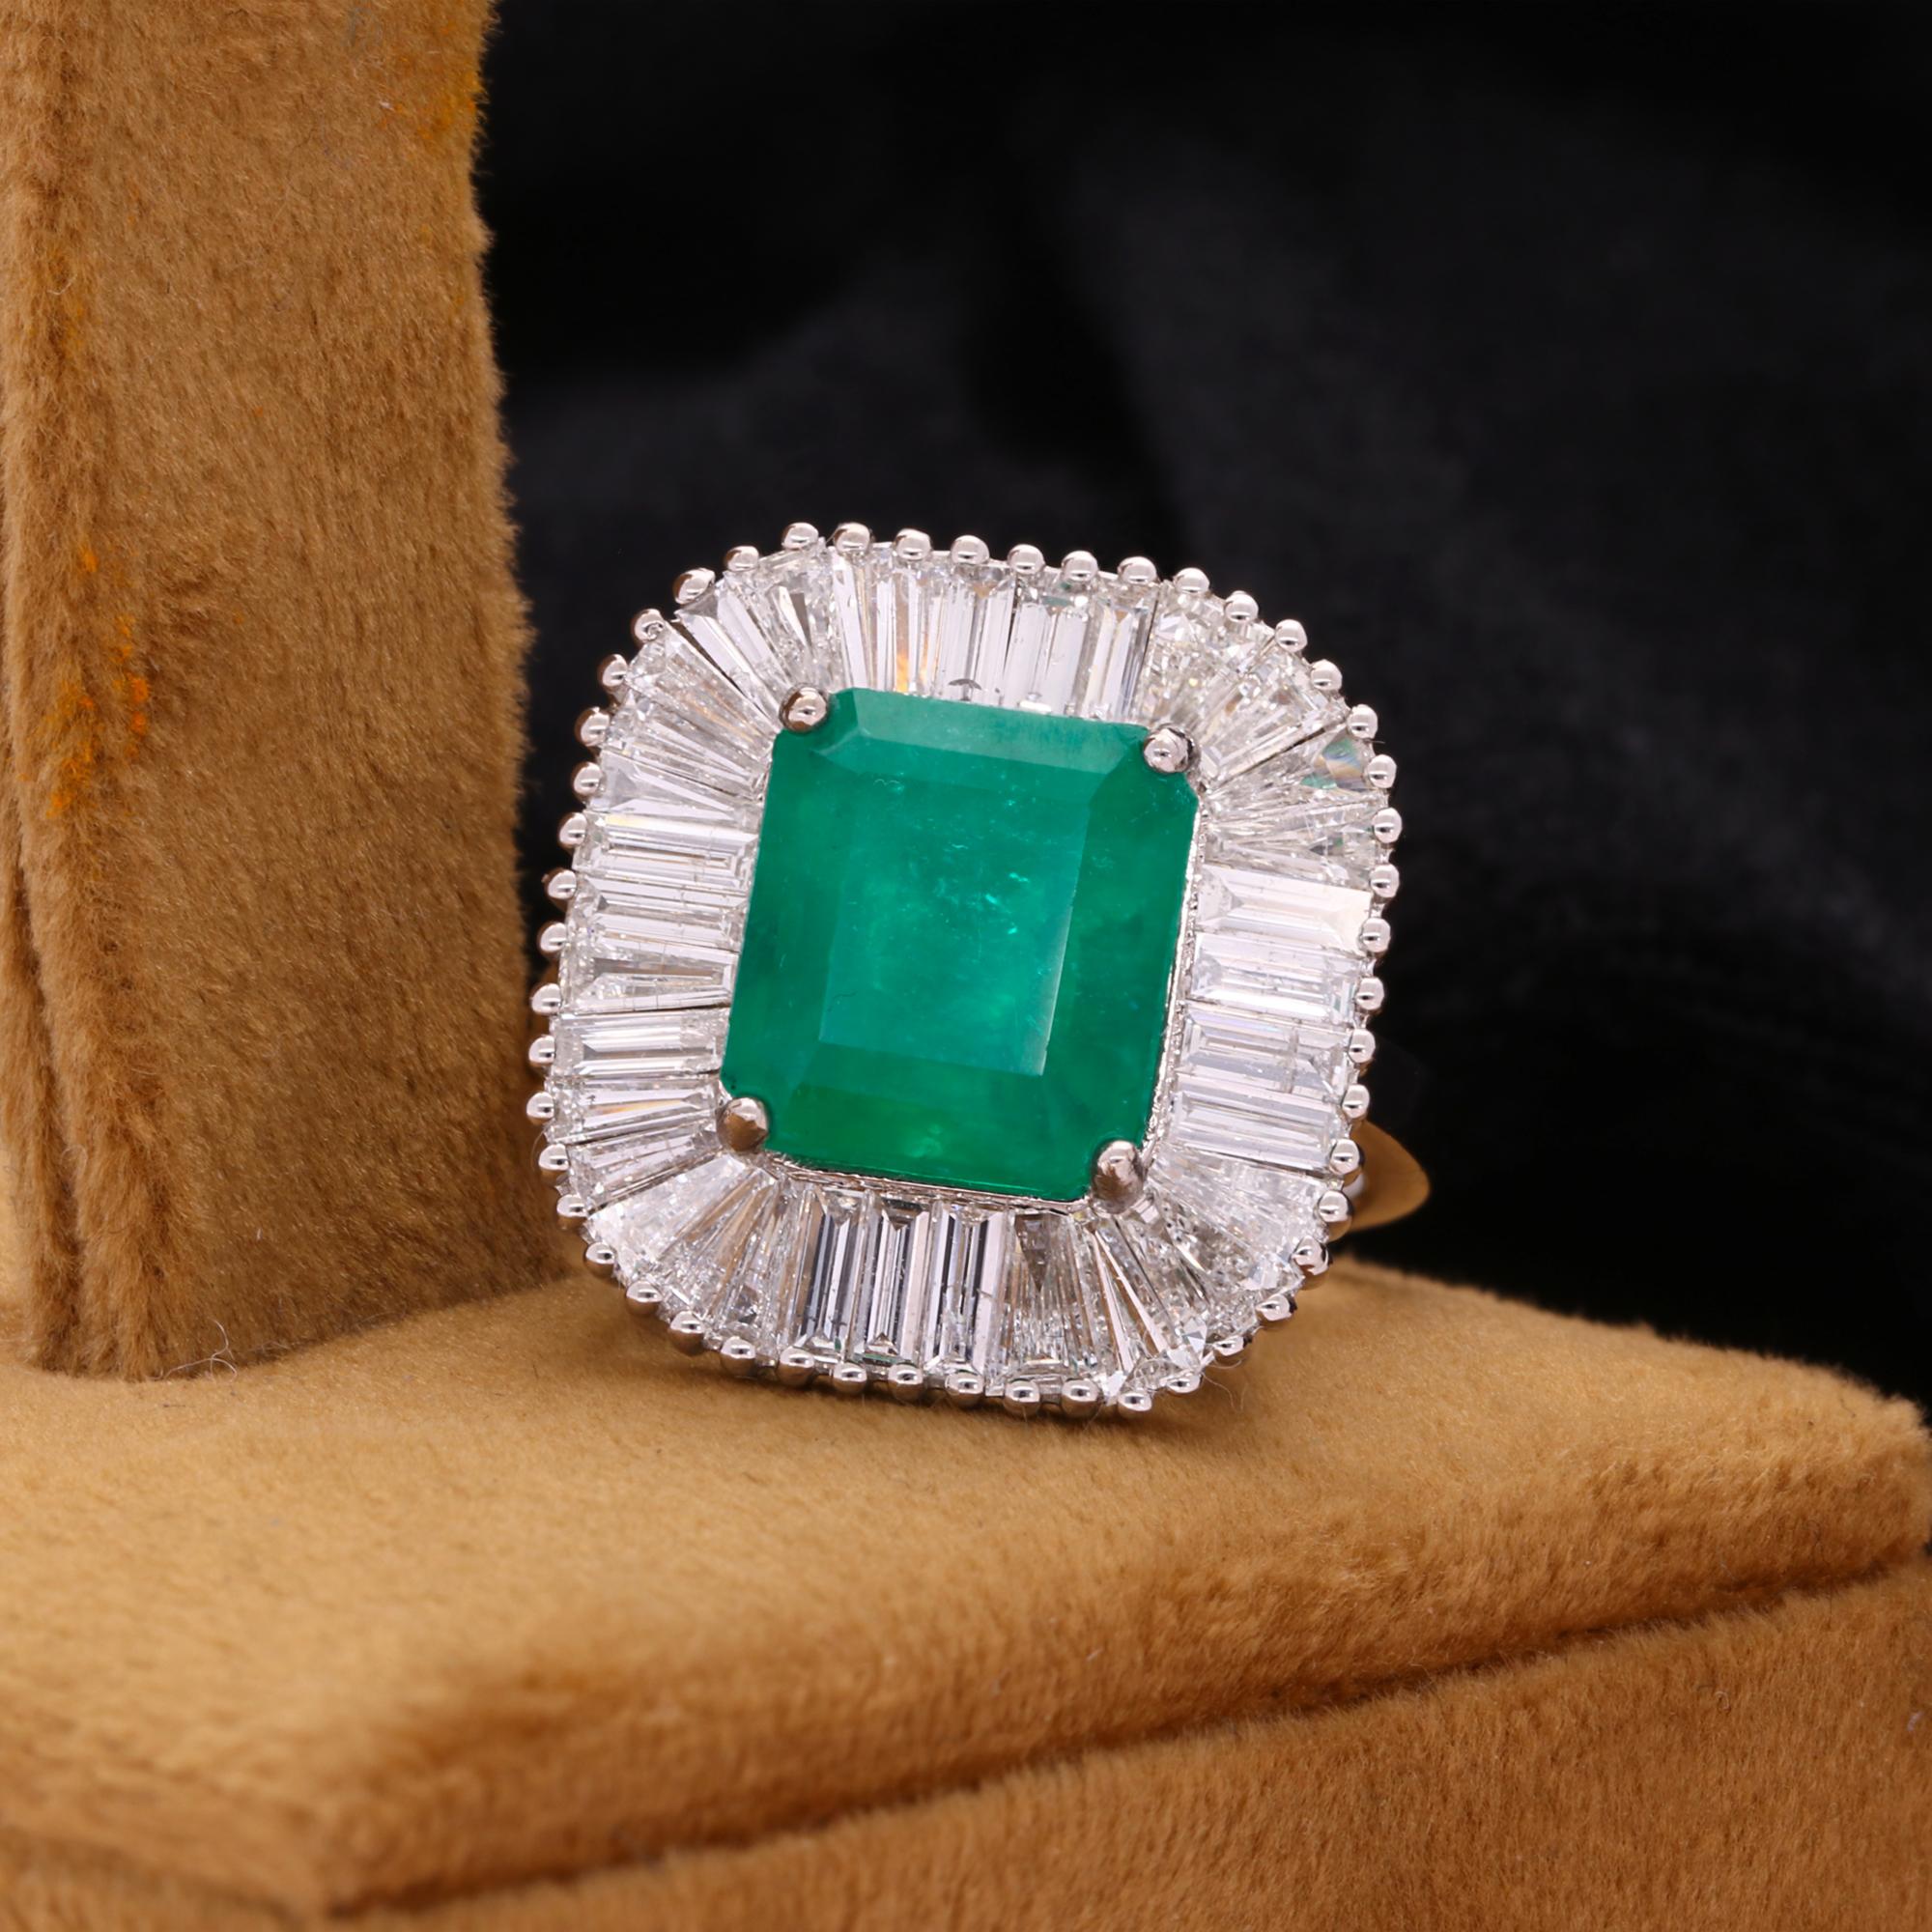 For Sale:  Natural Emerald Gemstone Cocktail Ring Baguette Diamond 18k White Gold Jewelry 4